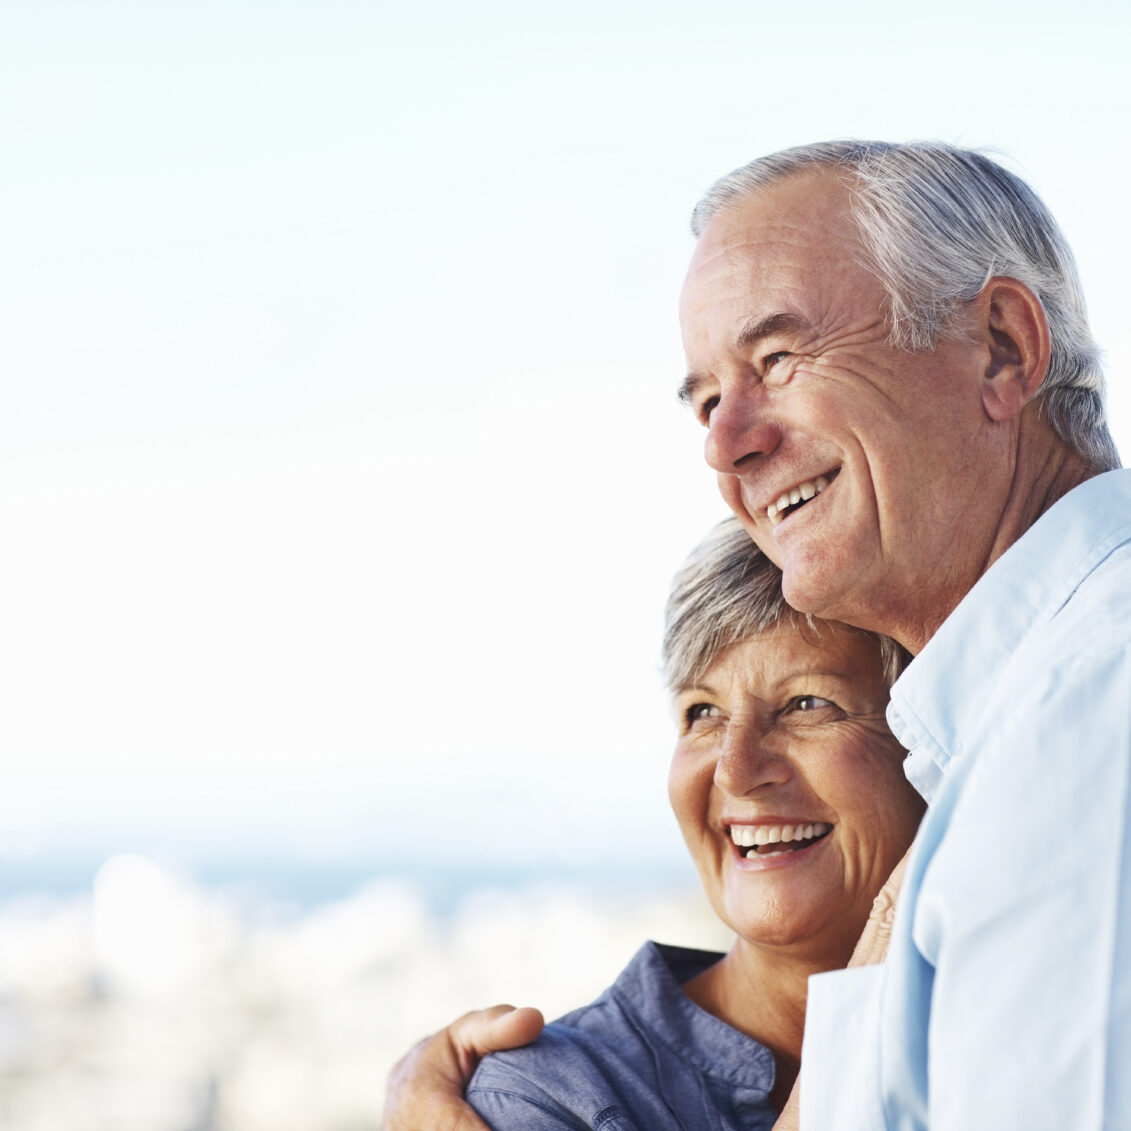 Closeup of handsome mature man and woman smiling while embracing outdoors